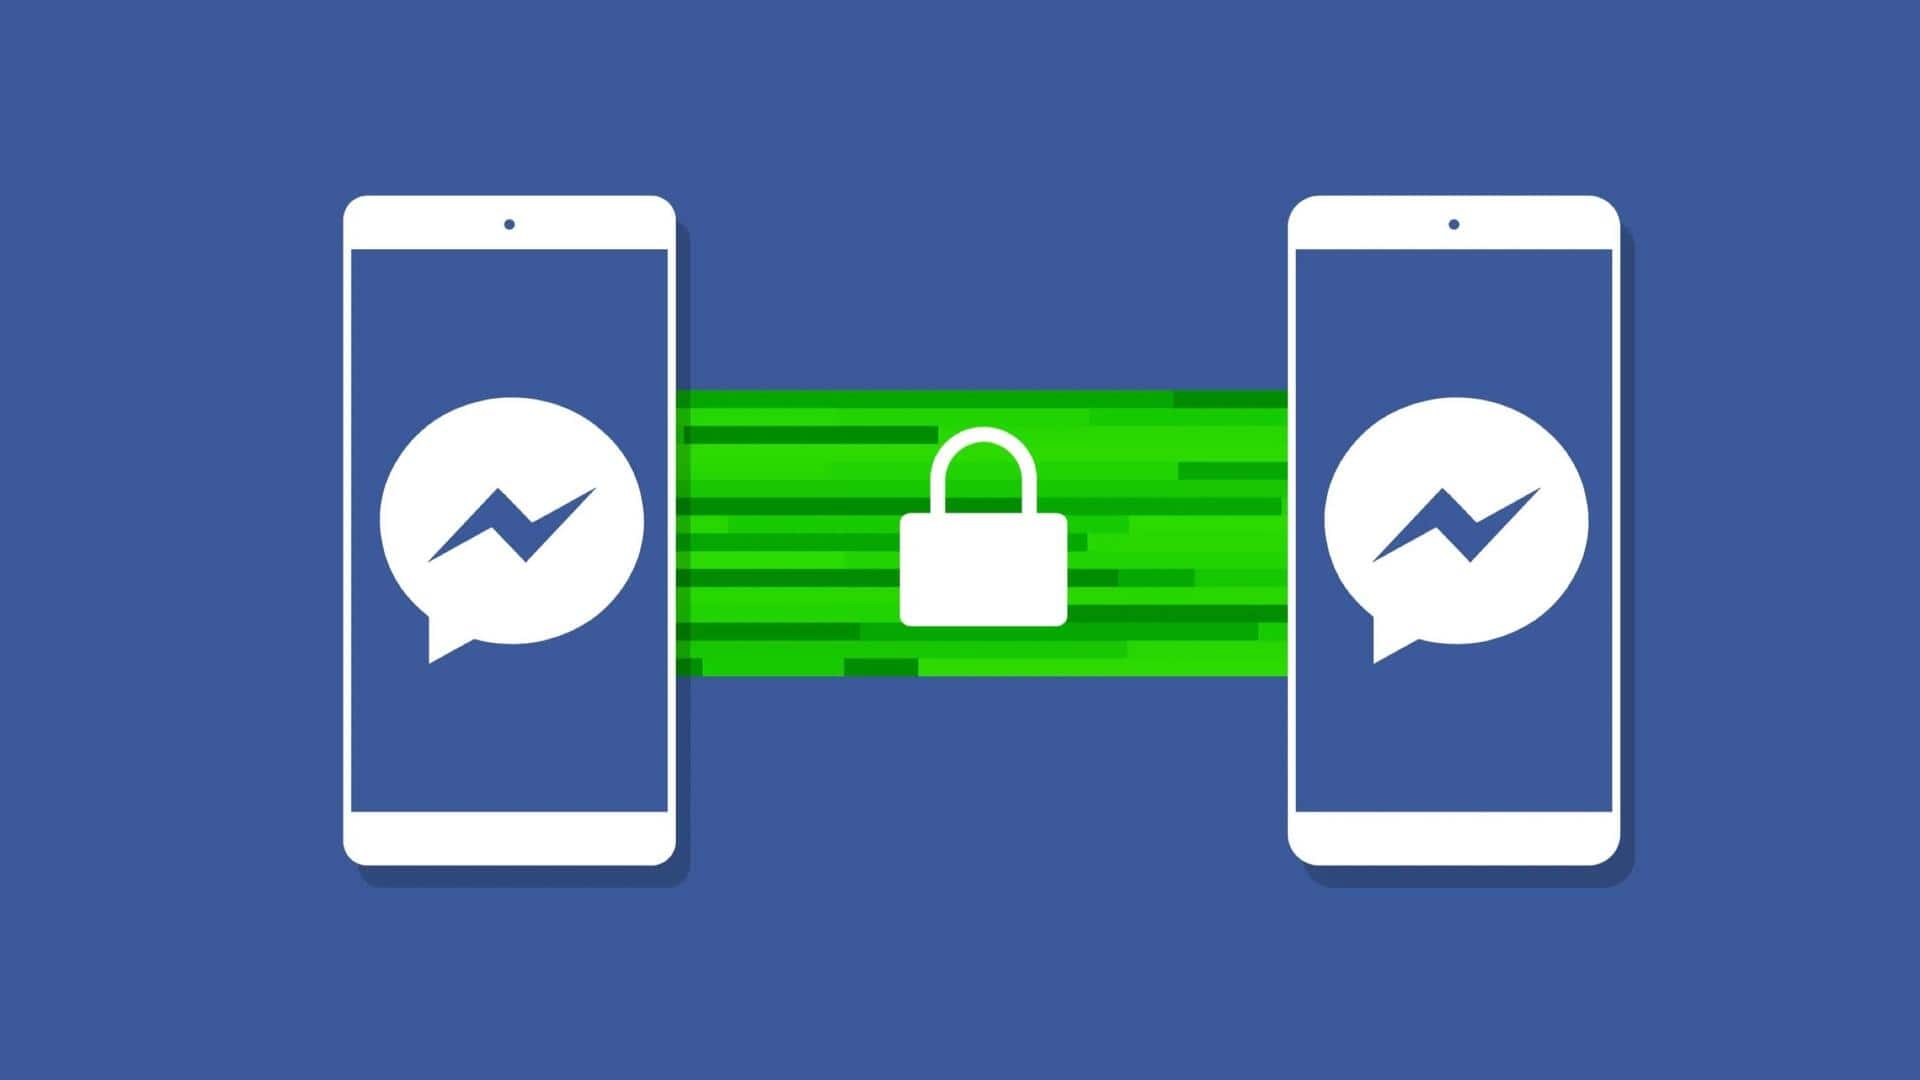 Your Facebook Messenger chats are now end-to-end encrypted